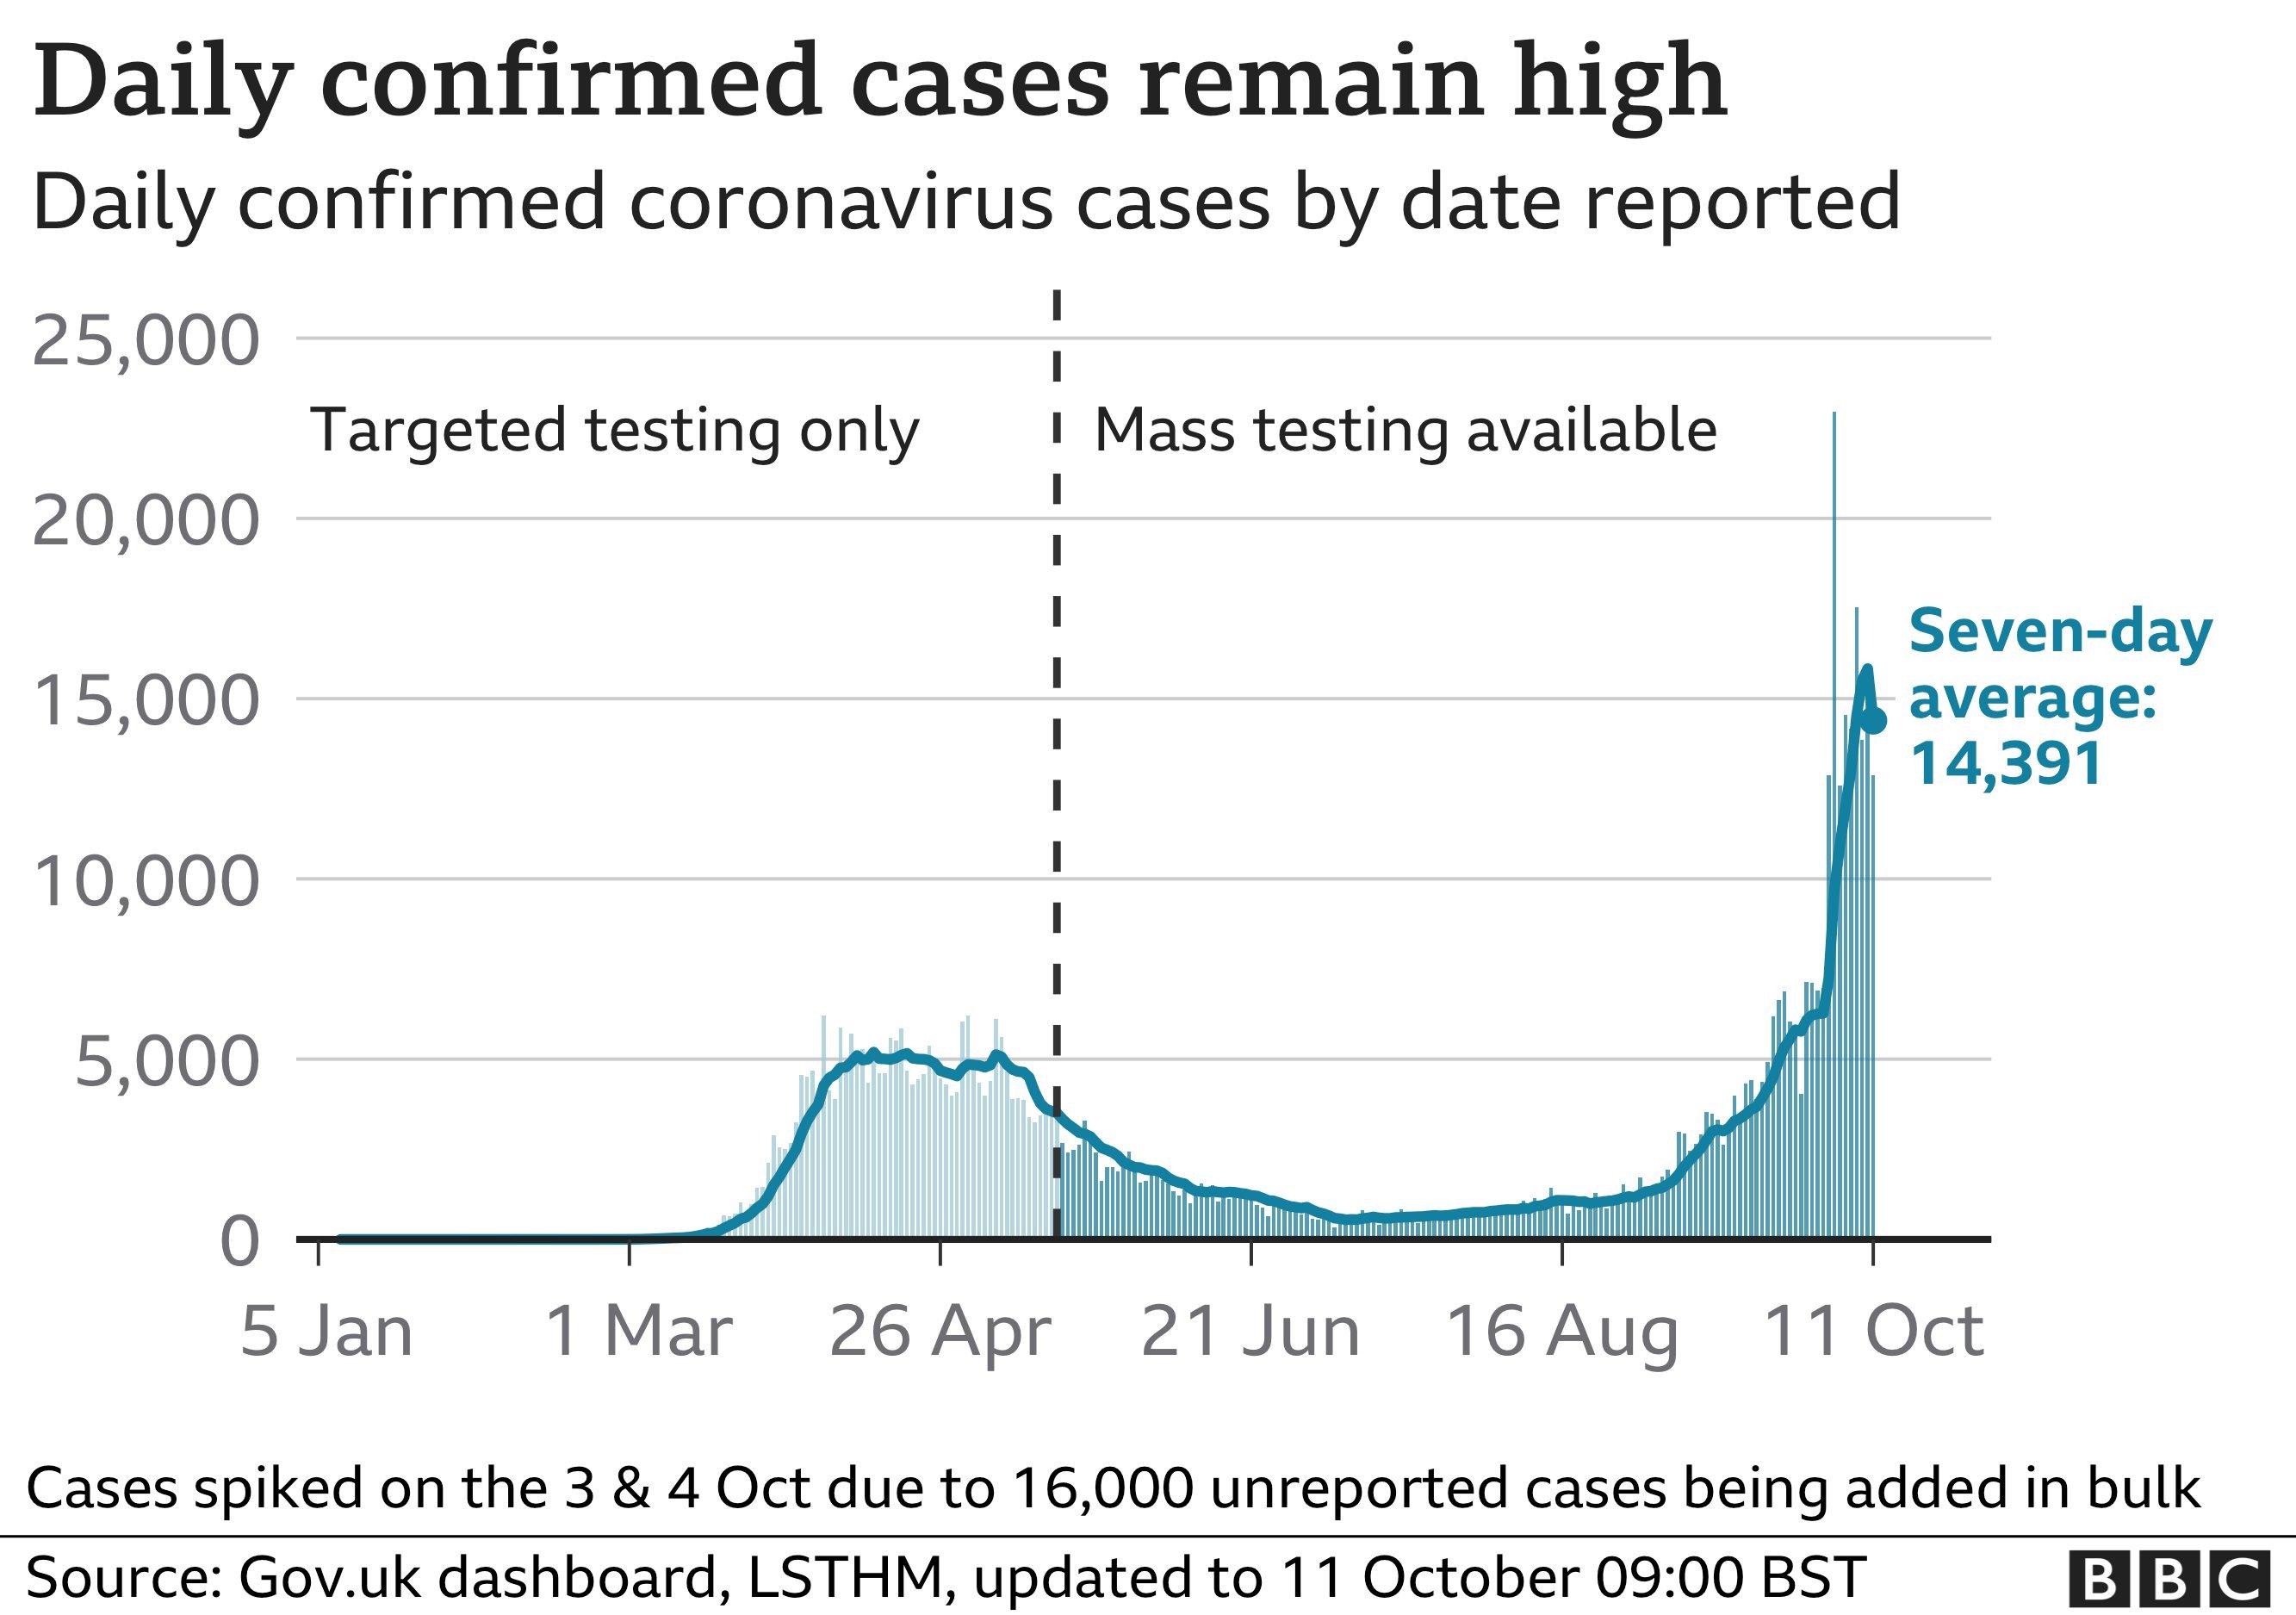 Chart showing daily confirmed cases remain high